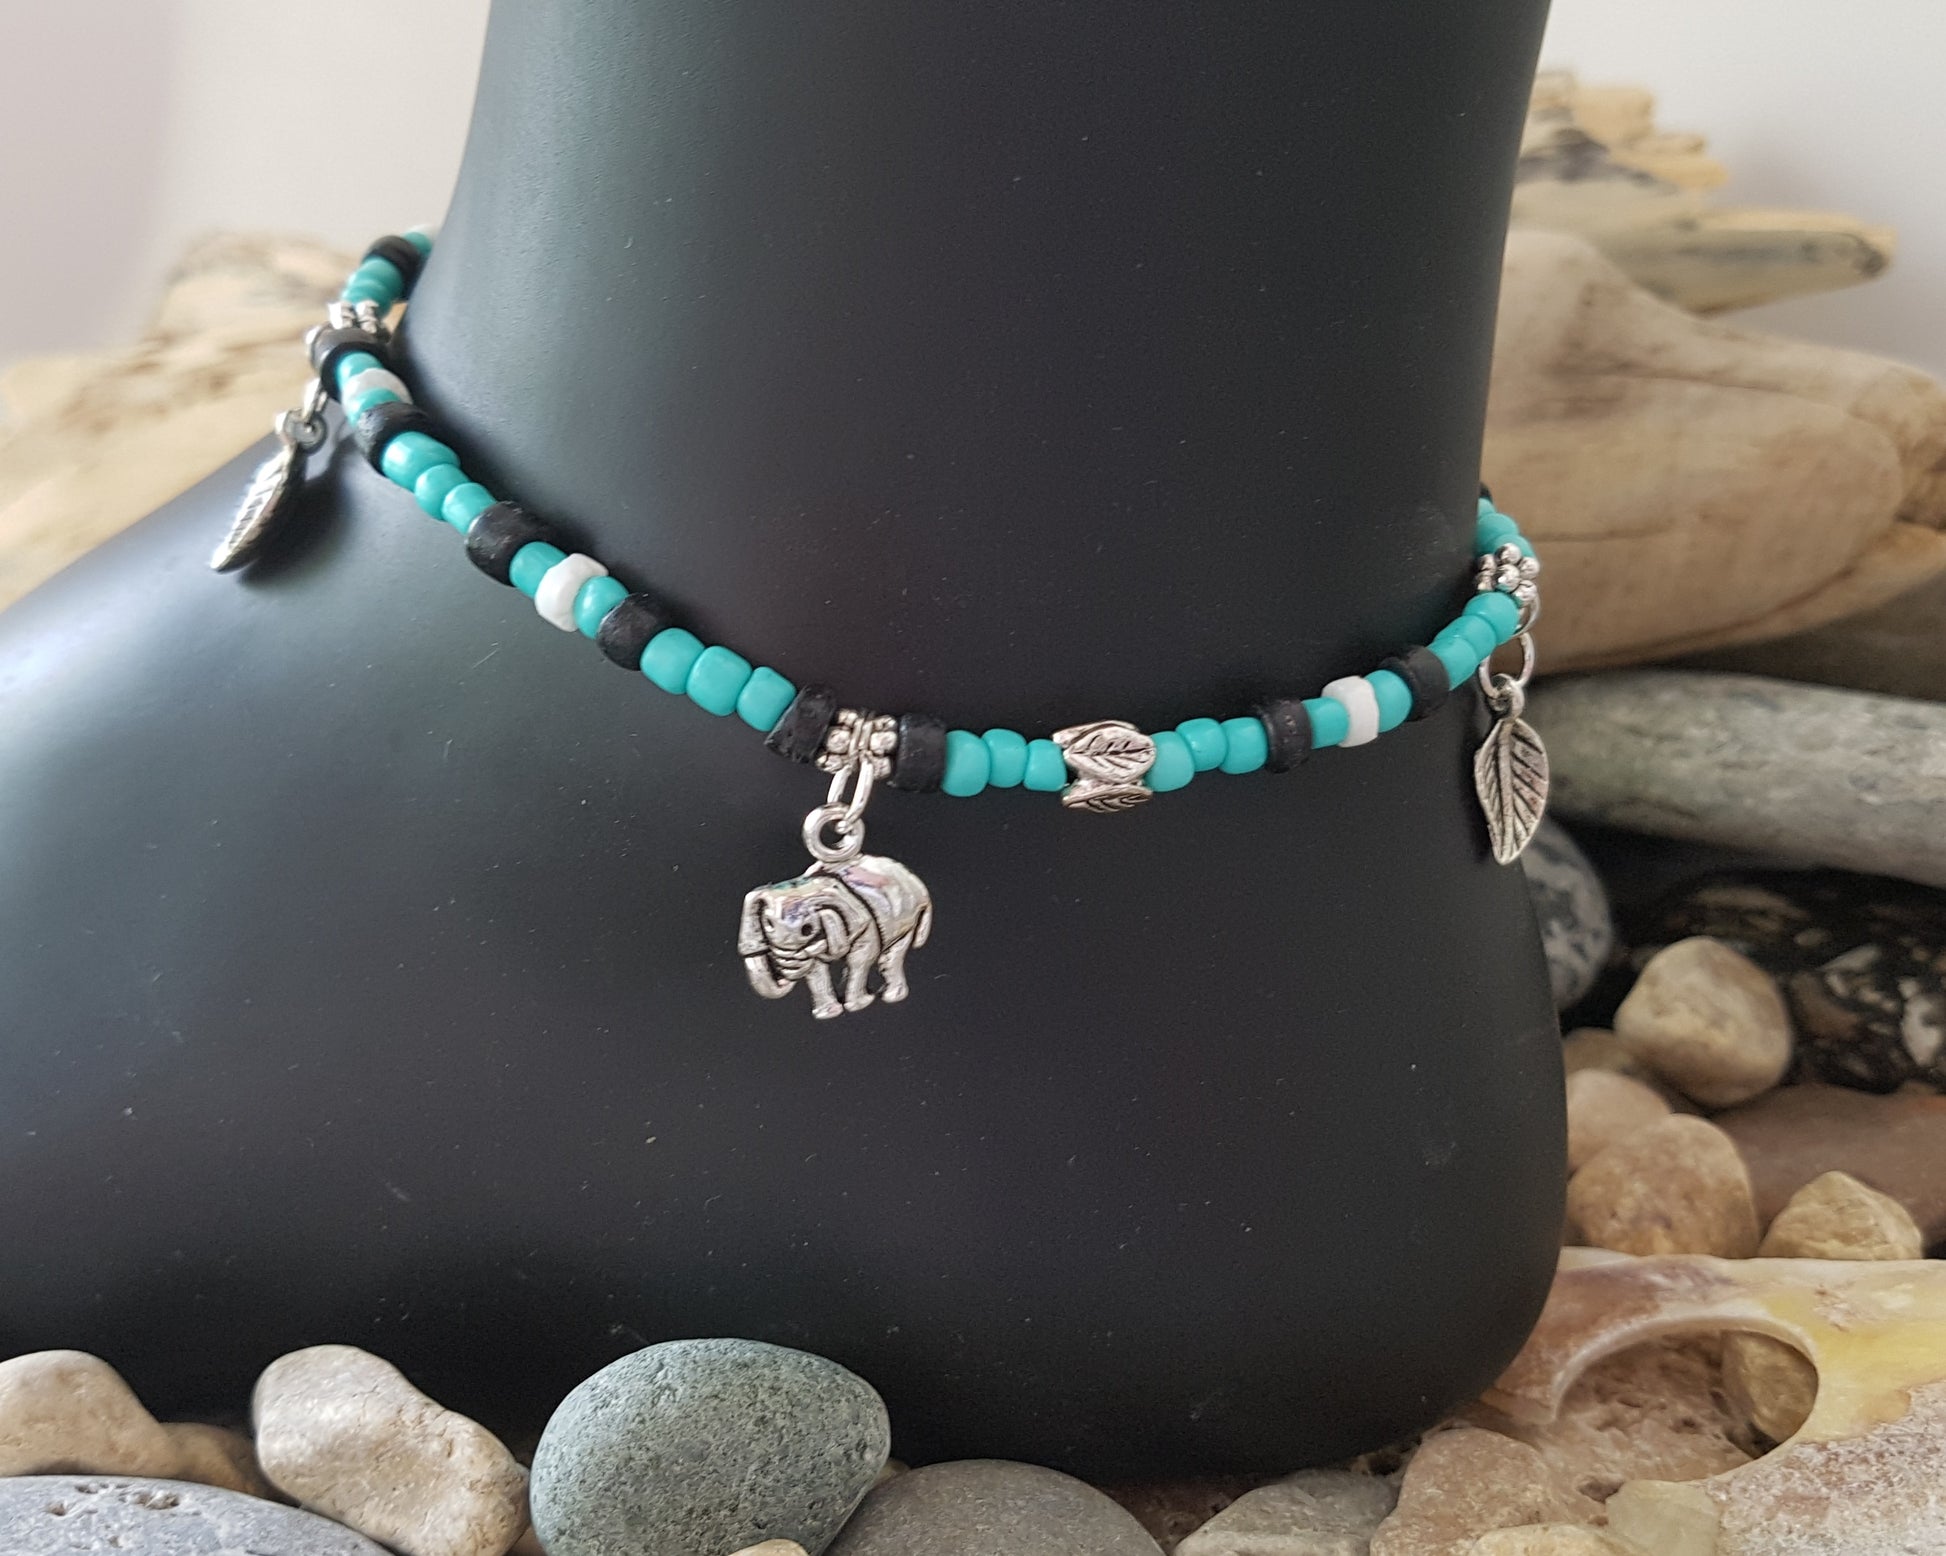 Elephant Turquoise Forest Anklet, Elephant Anklet, Beaded Anklet with Turquoise, Vintage white shell, Vintage Coconut beads with dangling Elephant pendants